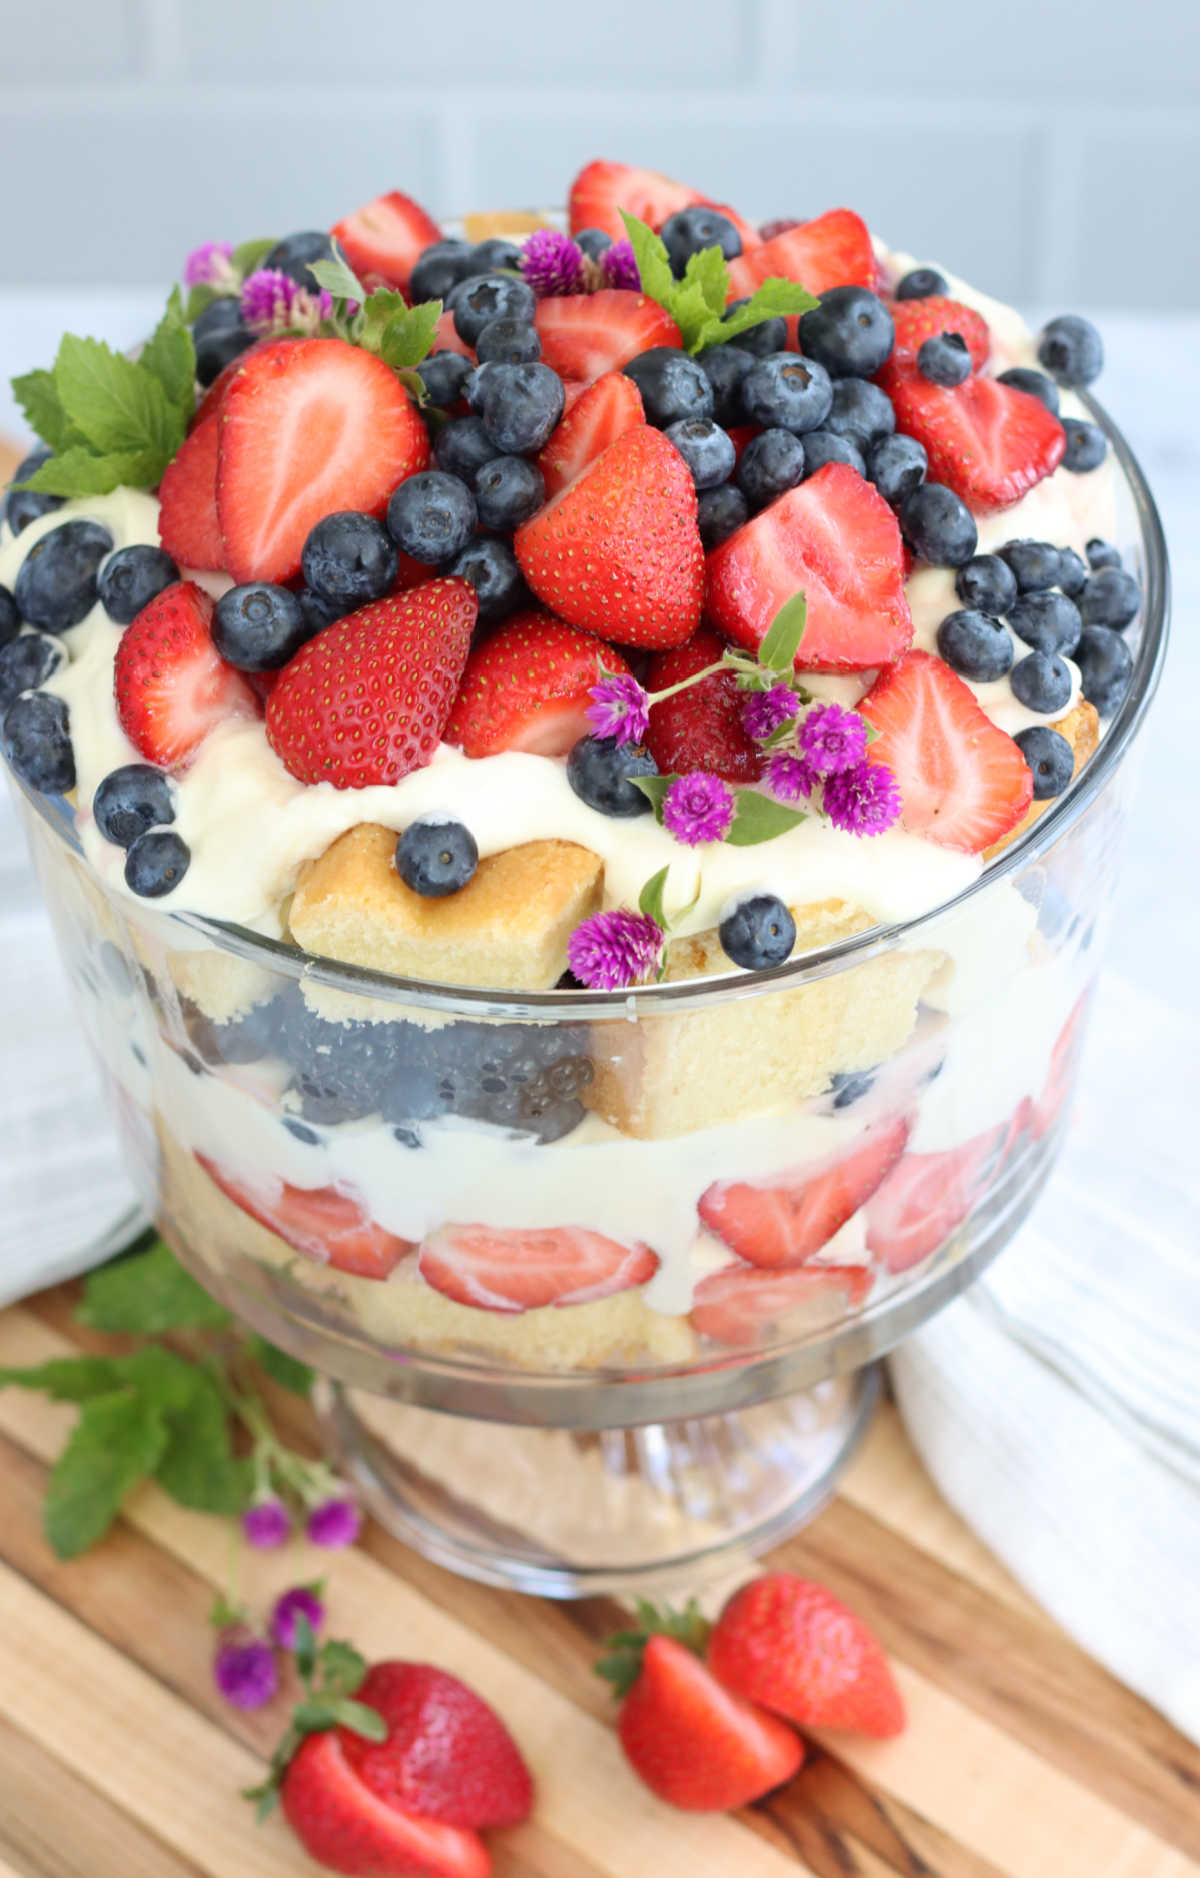 Trifle dessert with layers of cake, pudding and berries.